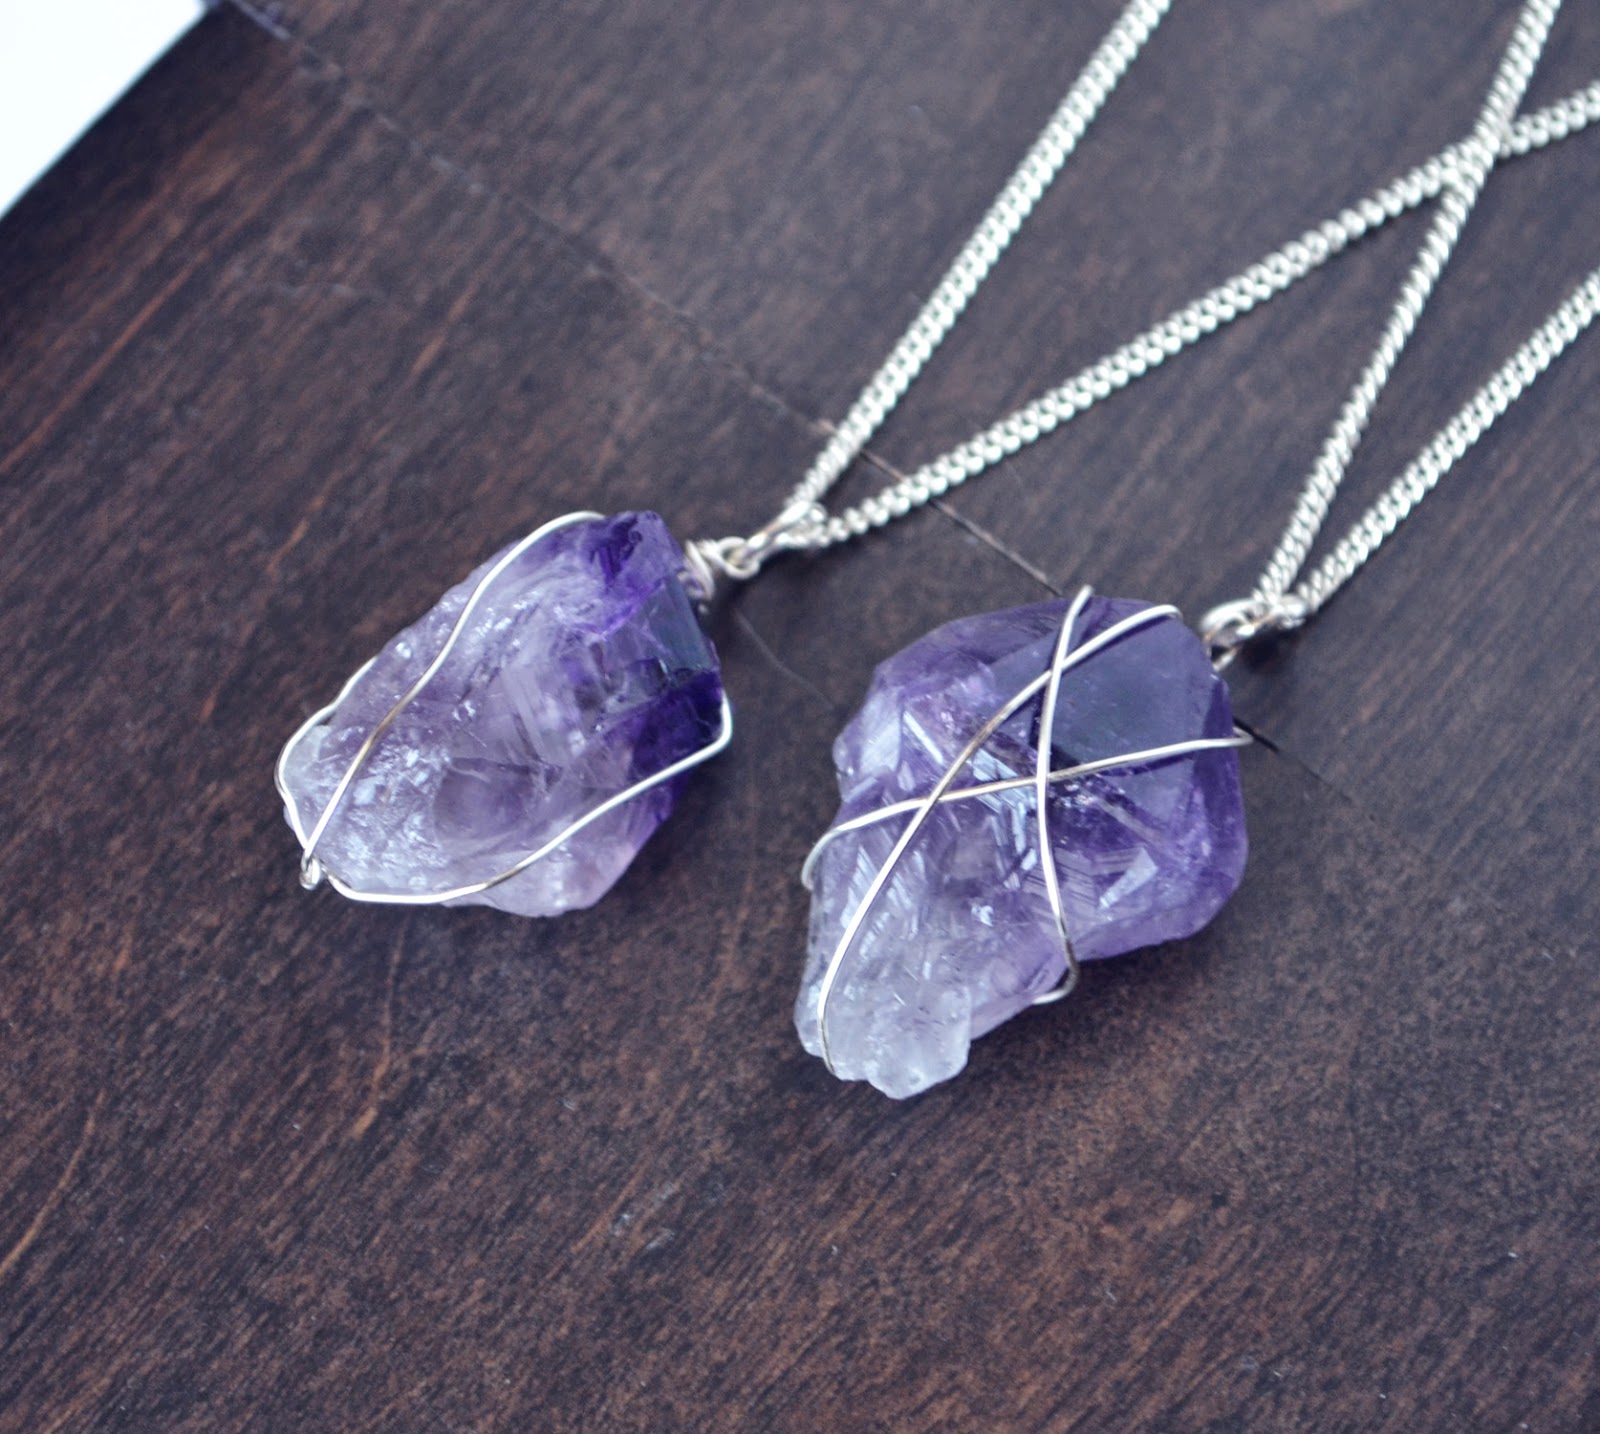 https://www.etsy.com/listing/90638968/raw-amethyst-necklace-raw-stone-natural?ref=shop_home_active_2